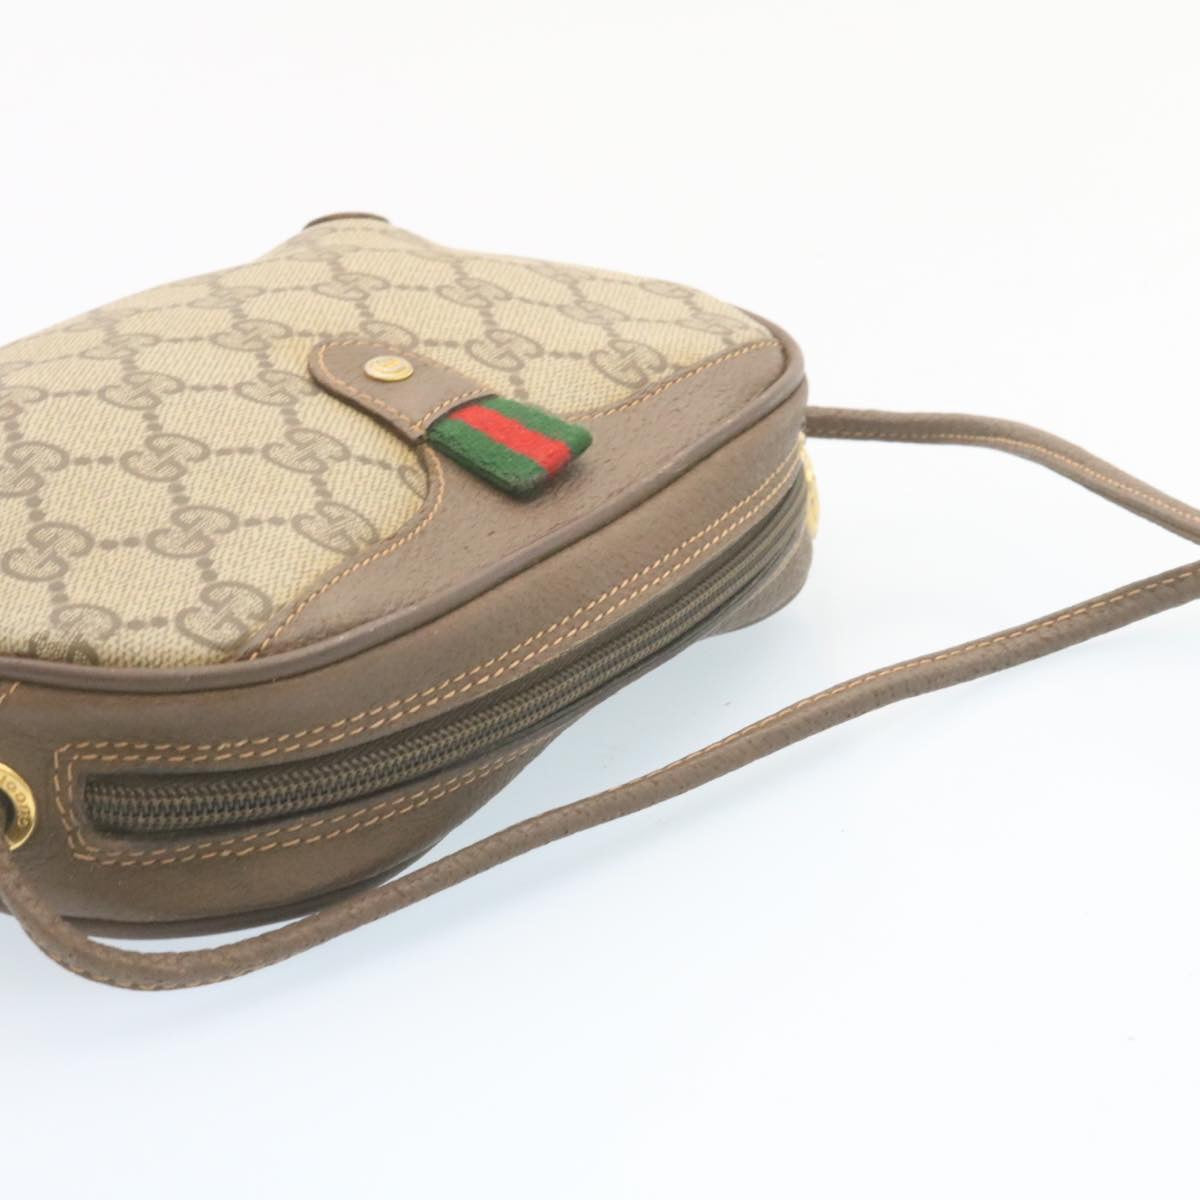 GUCCI Web Sherry Line GG Canvas Shoulder Bag Beige Red Green Auth am1986g